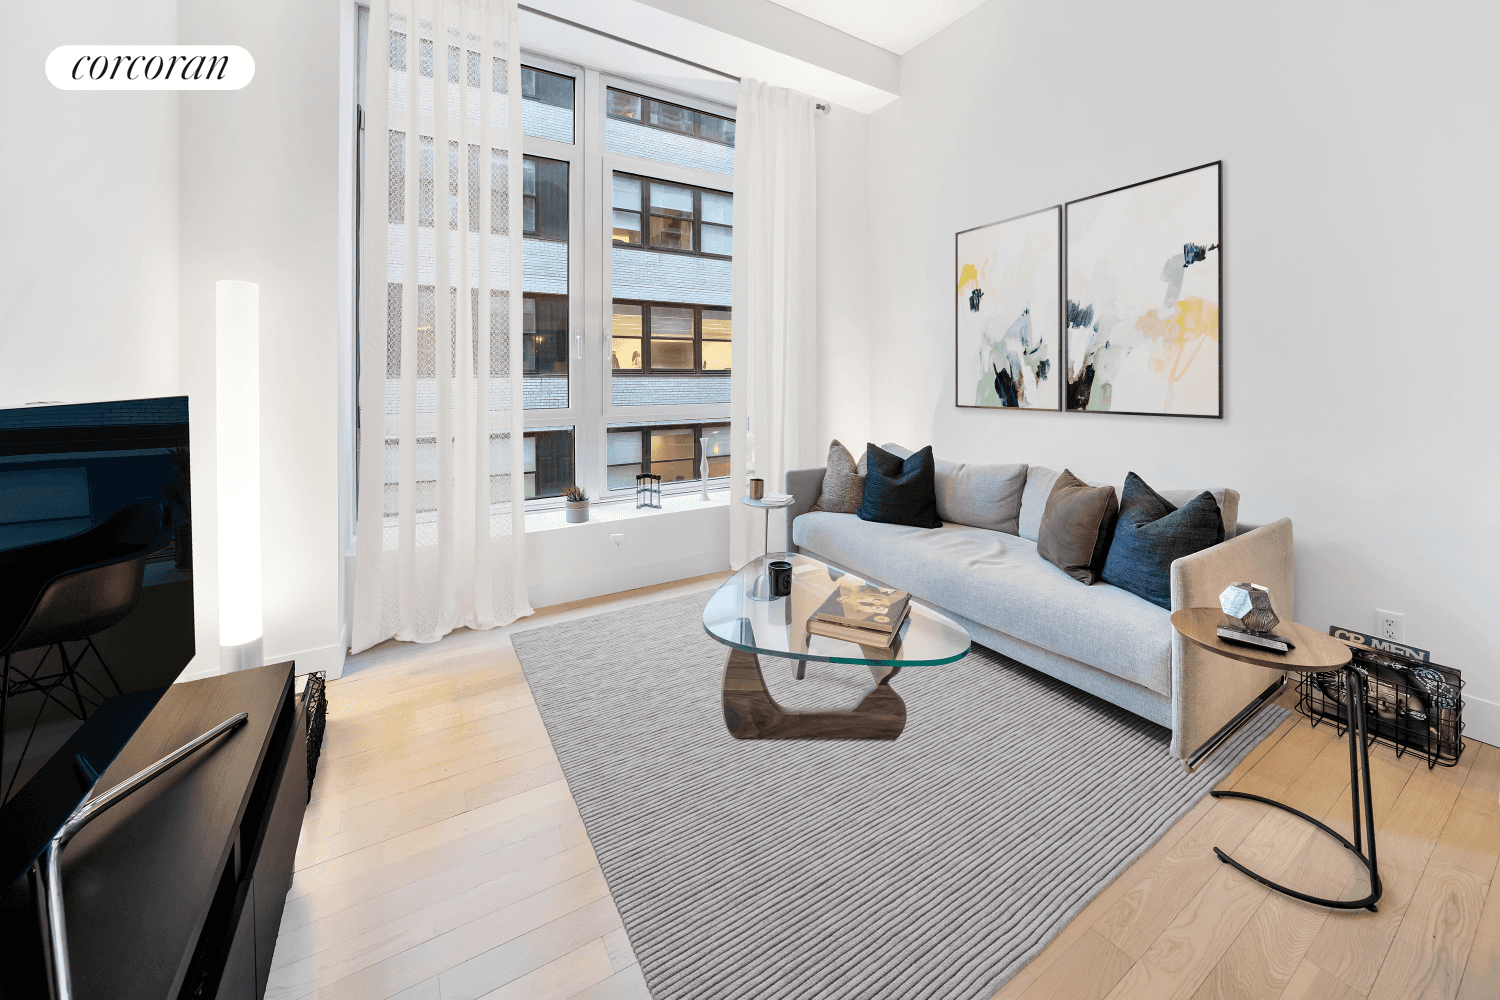 Also offered fully furnished for 4, 850 monthStep into this thoughtfully designed loft like studio apartment in heart of the Financial District.